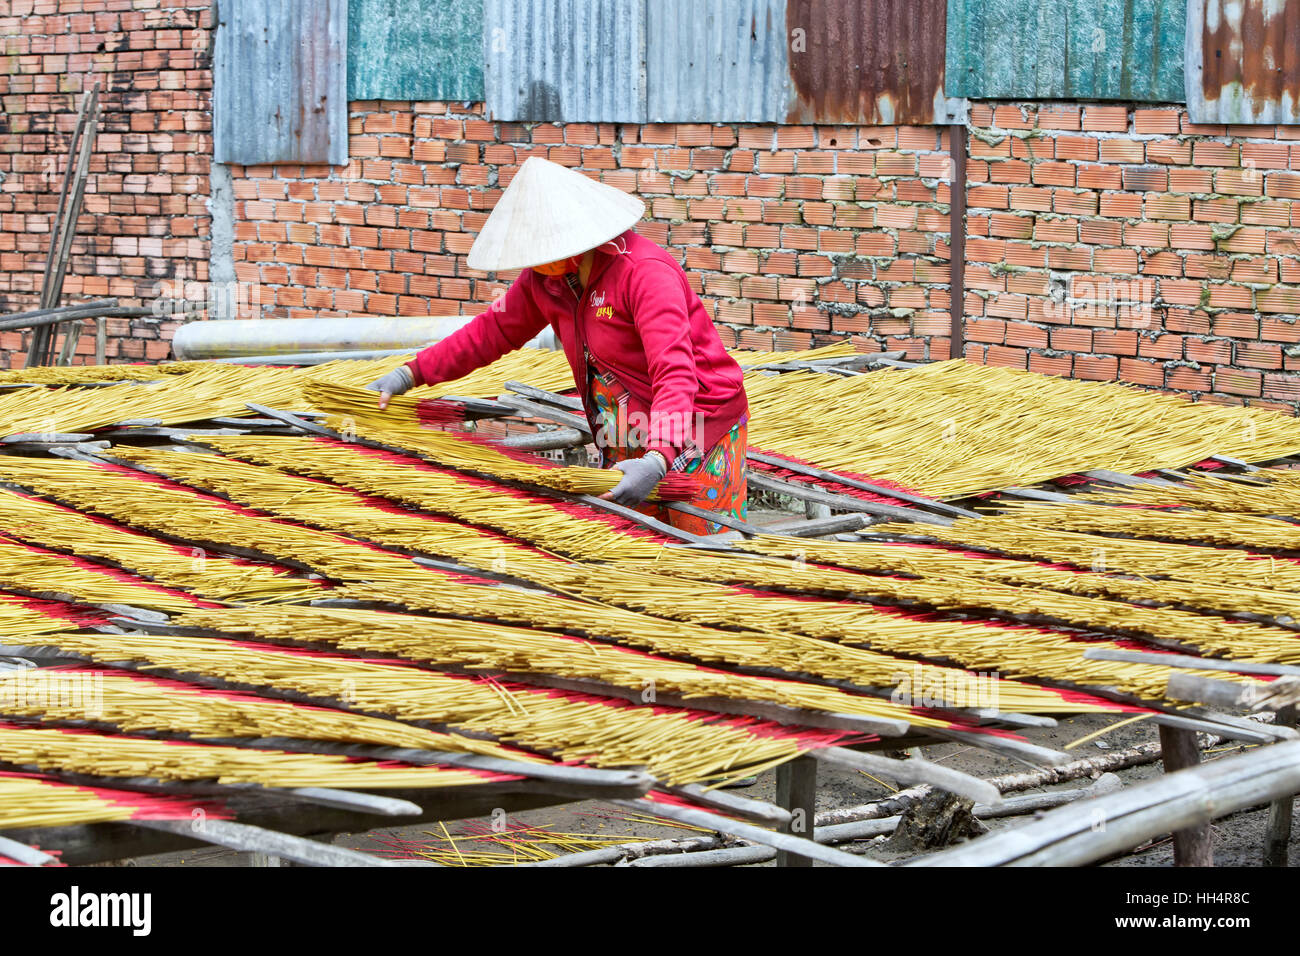 Worker distributing incense sticks for drying. Stock Photo